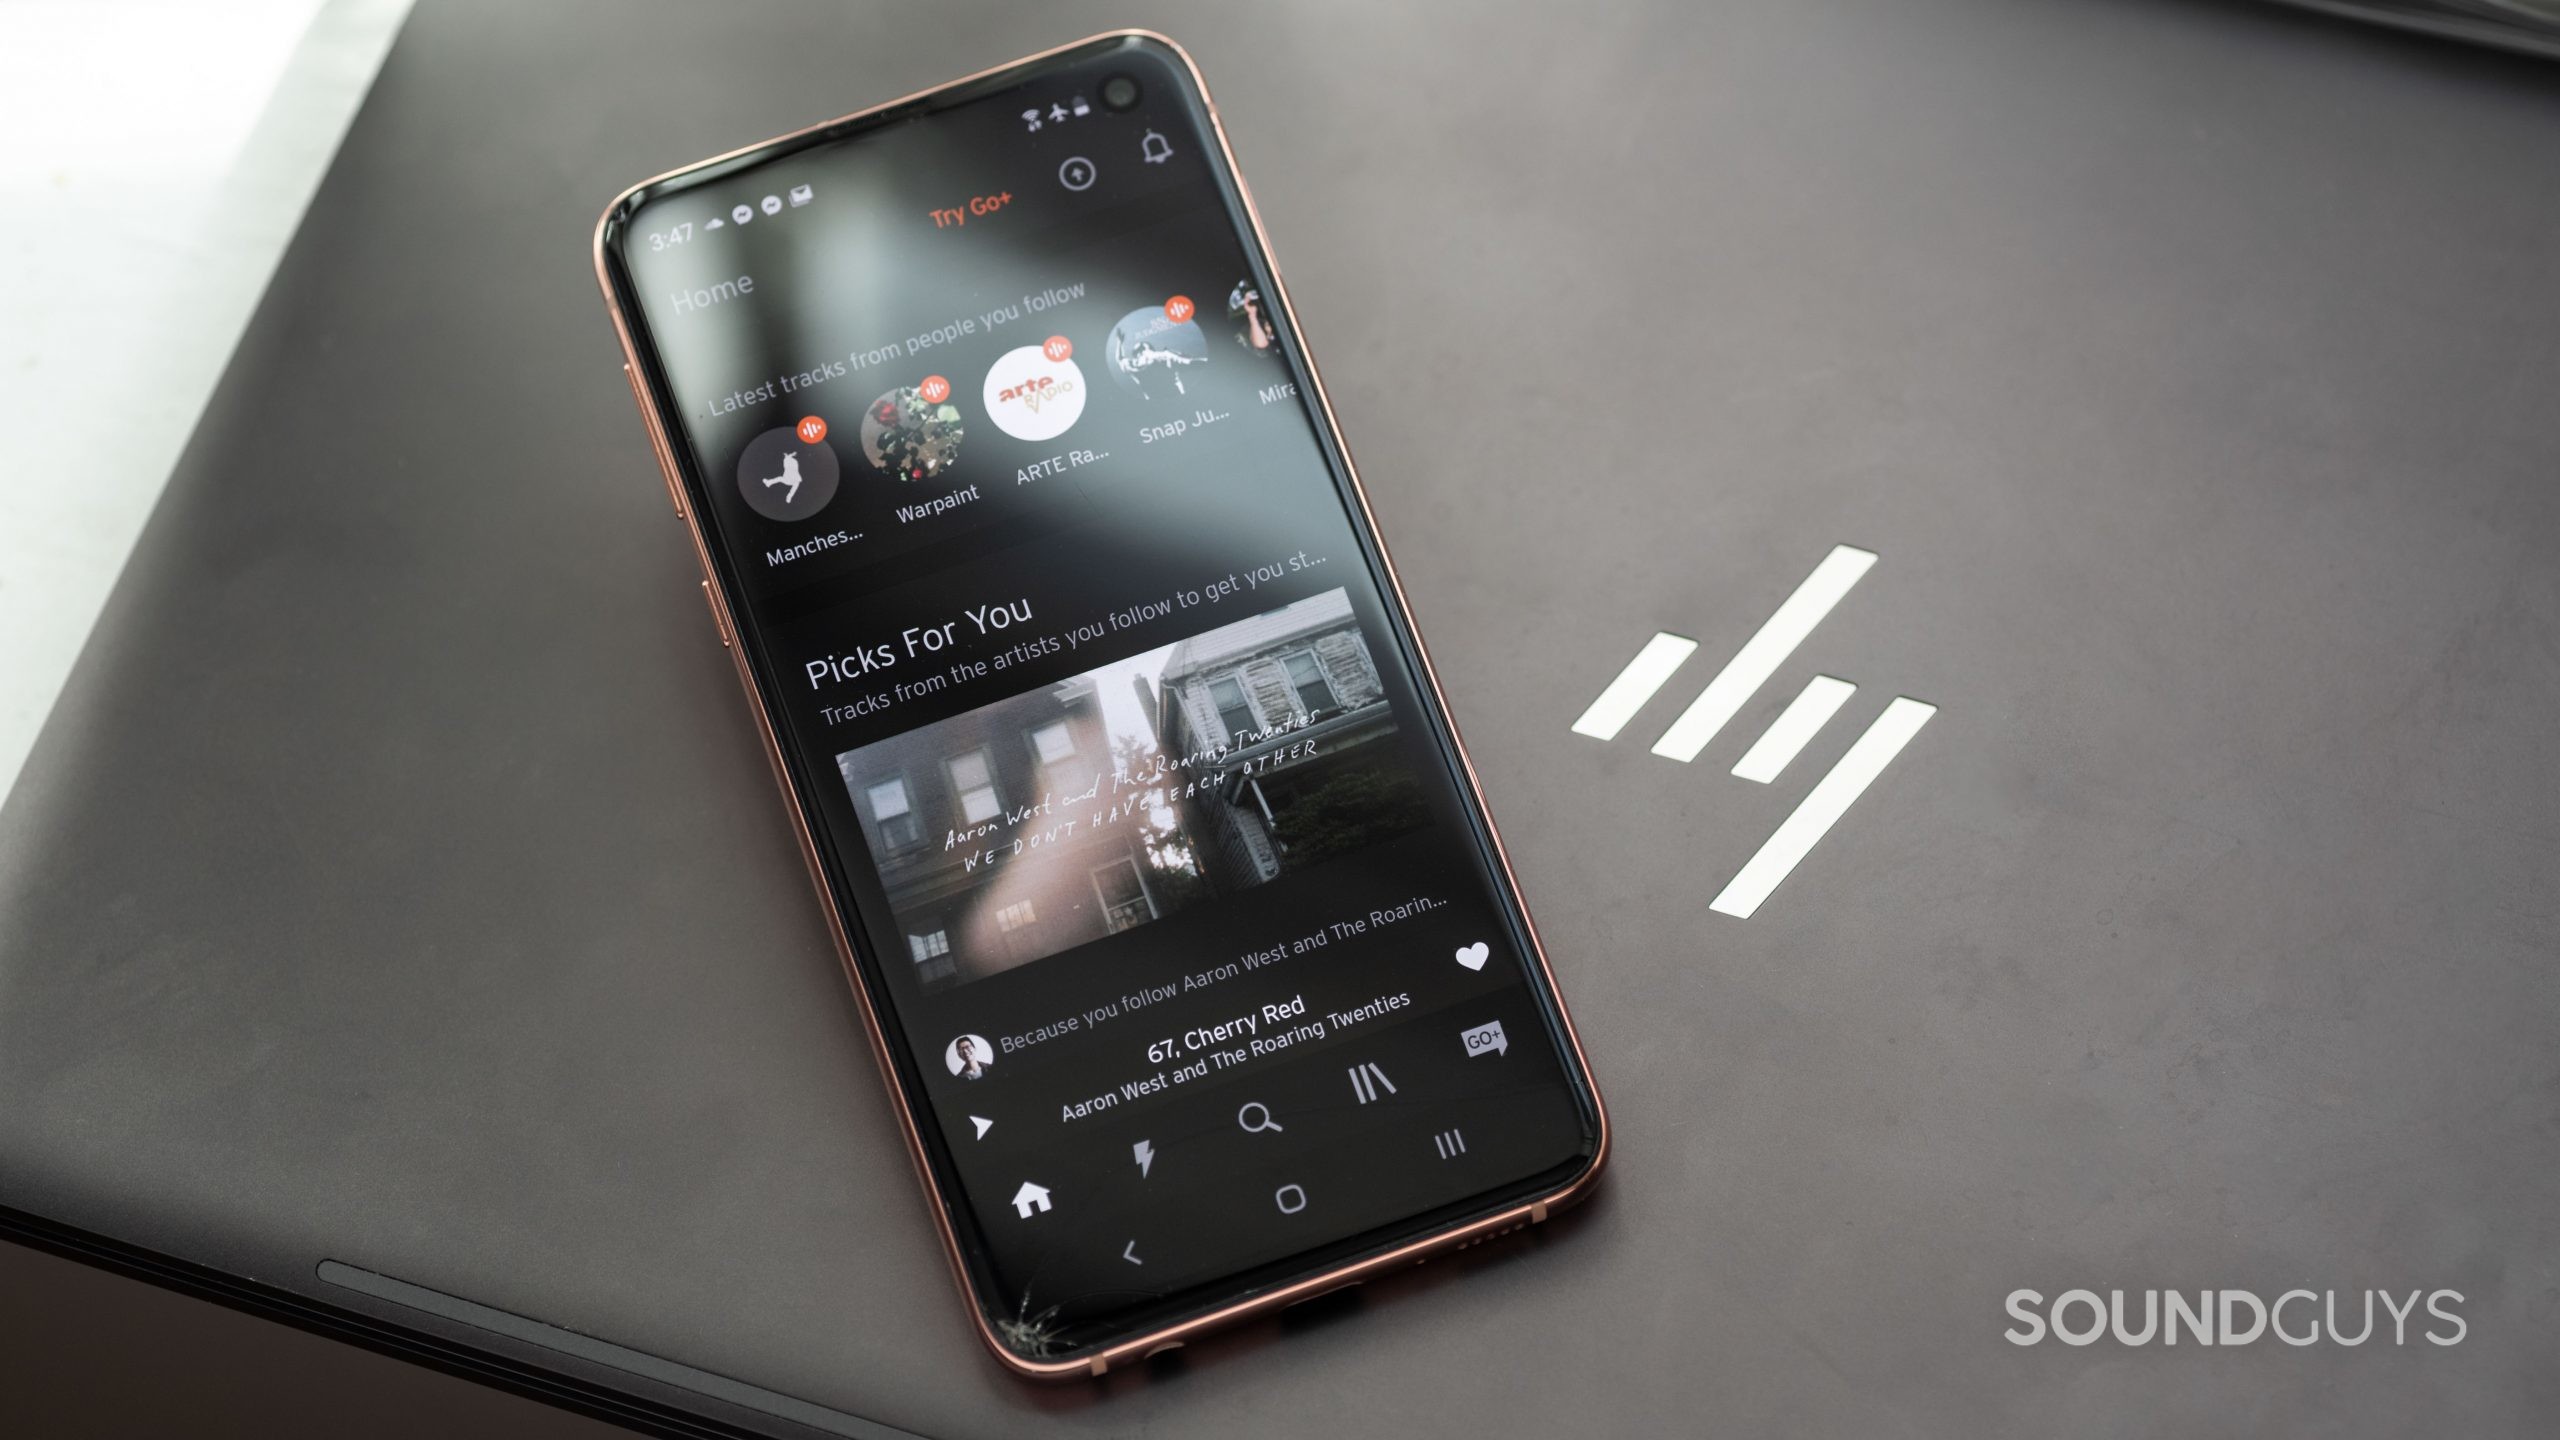 The SoundCloud mobile app open on an Android smartphone as it rests on top of an HP laptop.